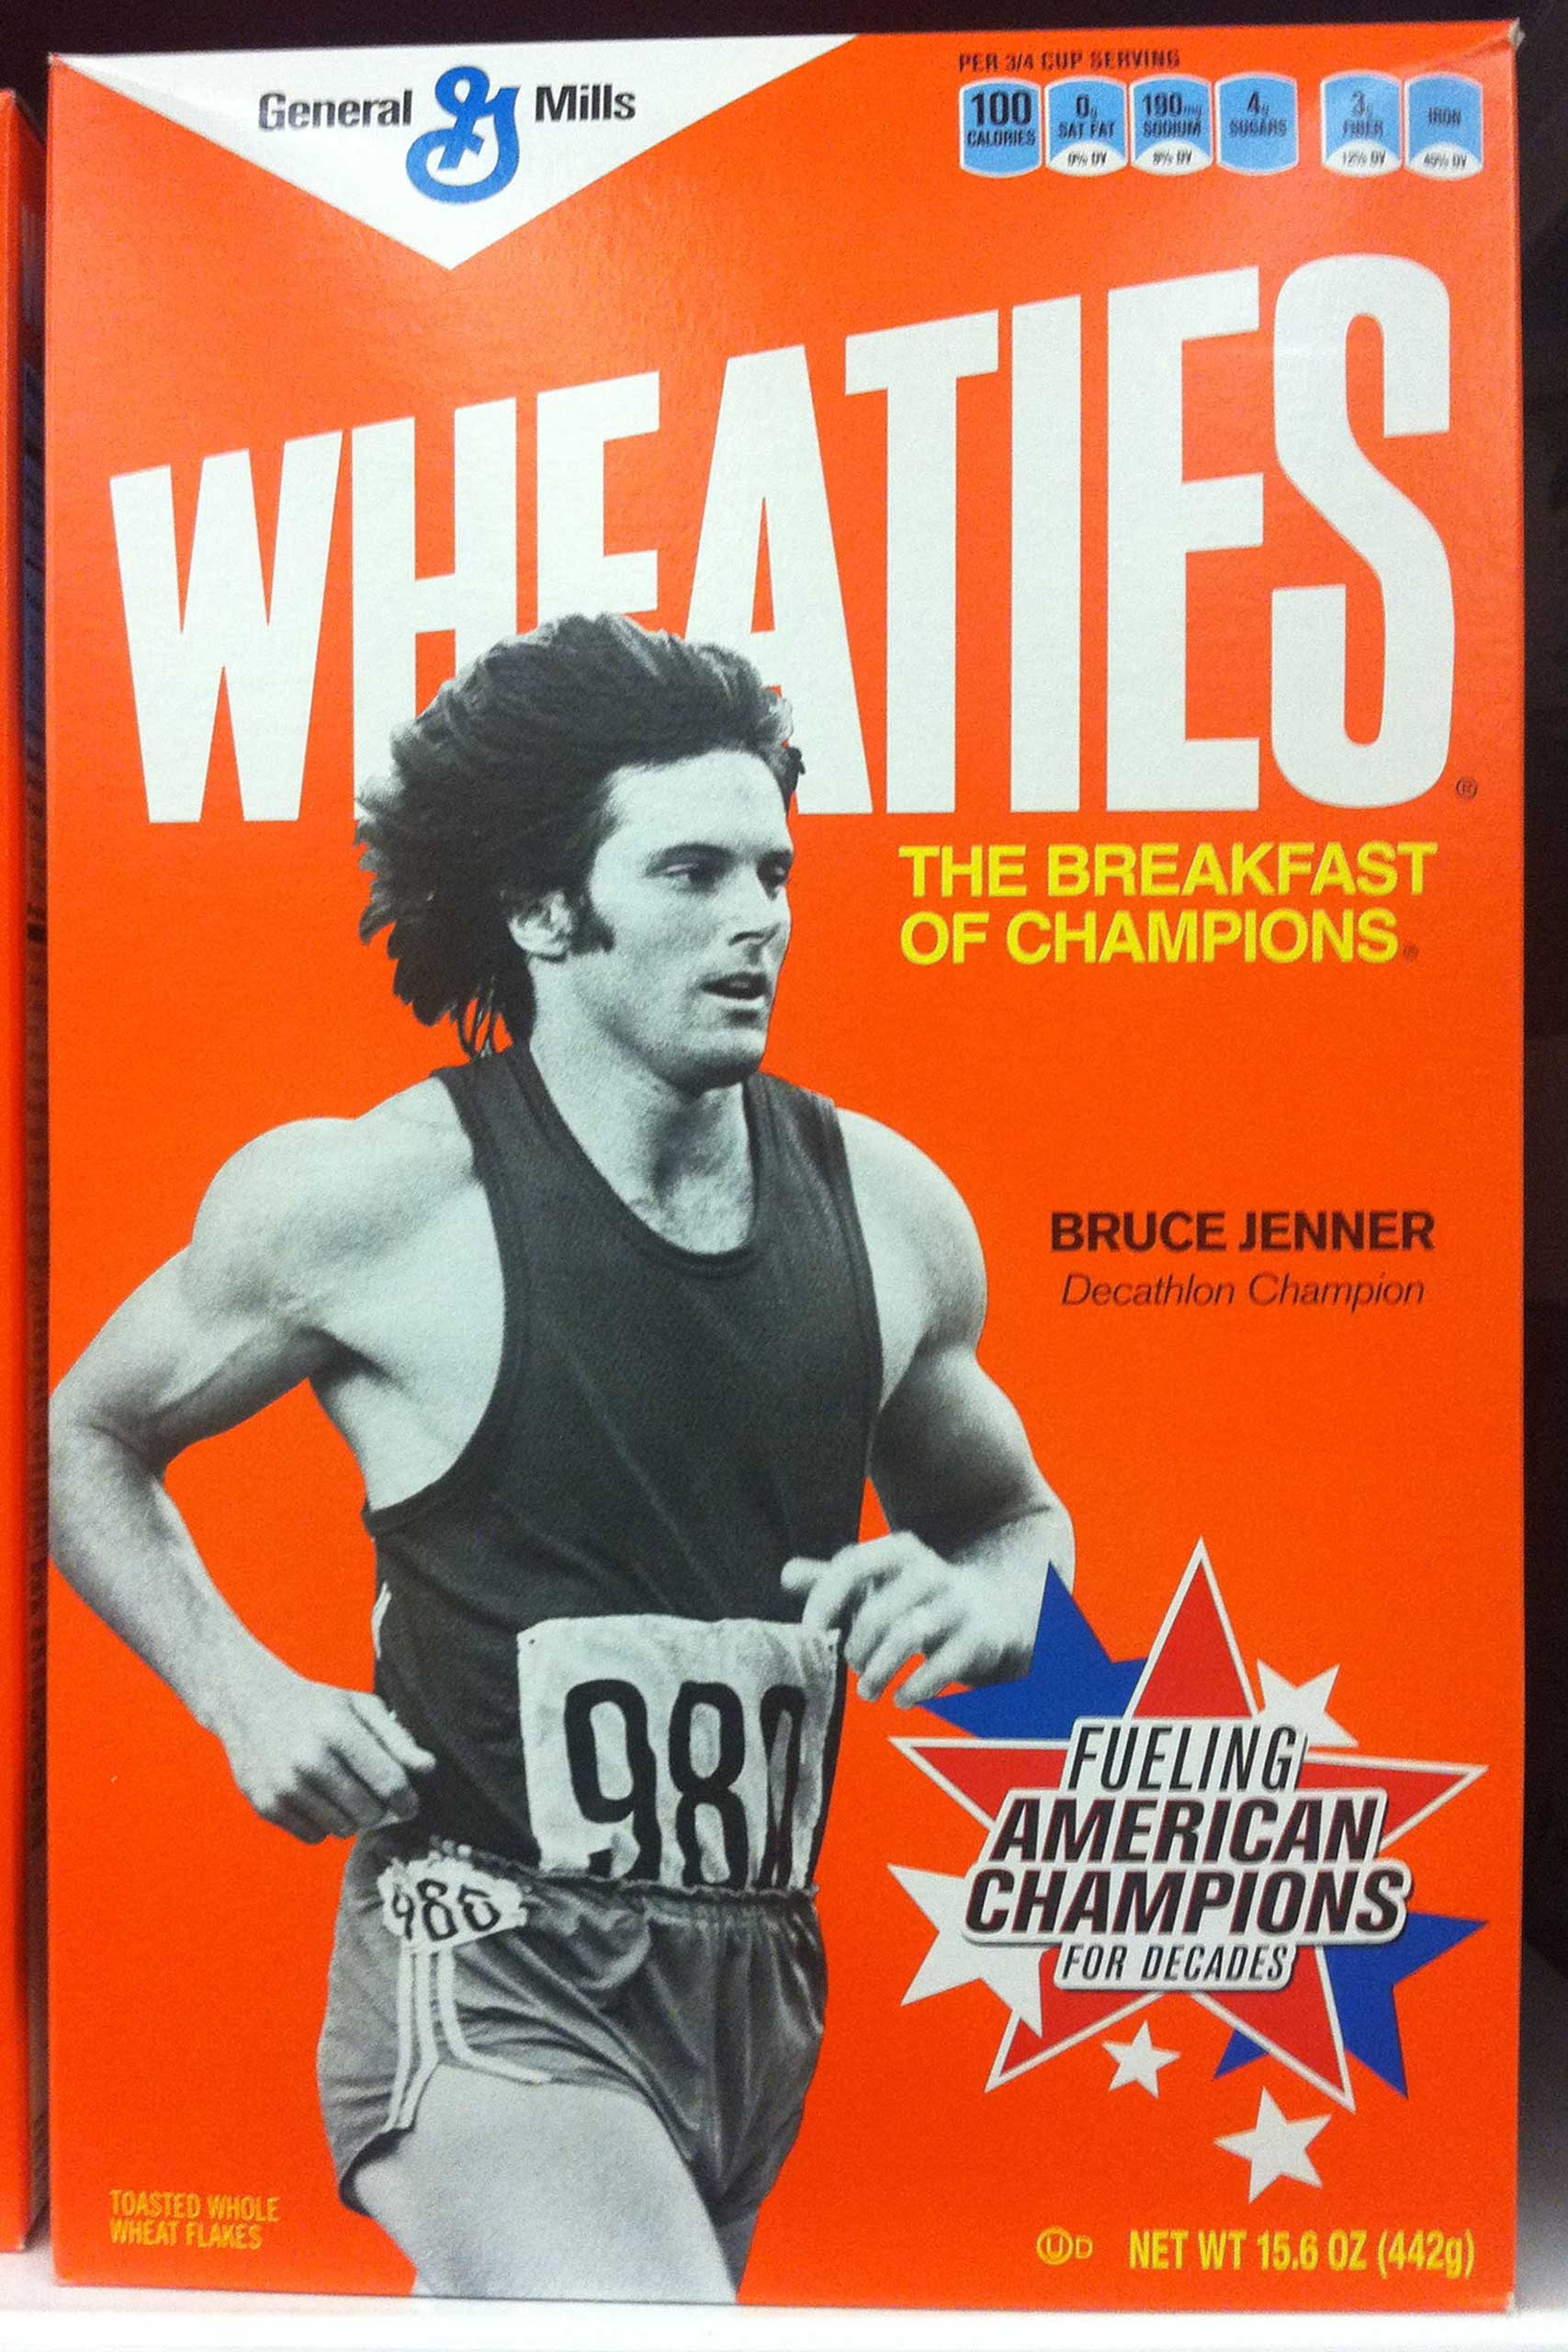 Bruce Jenner finds his way onto the breakfast tables of America. The 'Keeping Up with the Kardashians' star is shown in his youthful glory on the front cover of 'Wheaties' cereal boxes on sale now. (Splash News/Corbis)